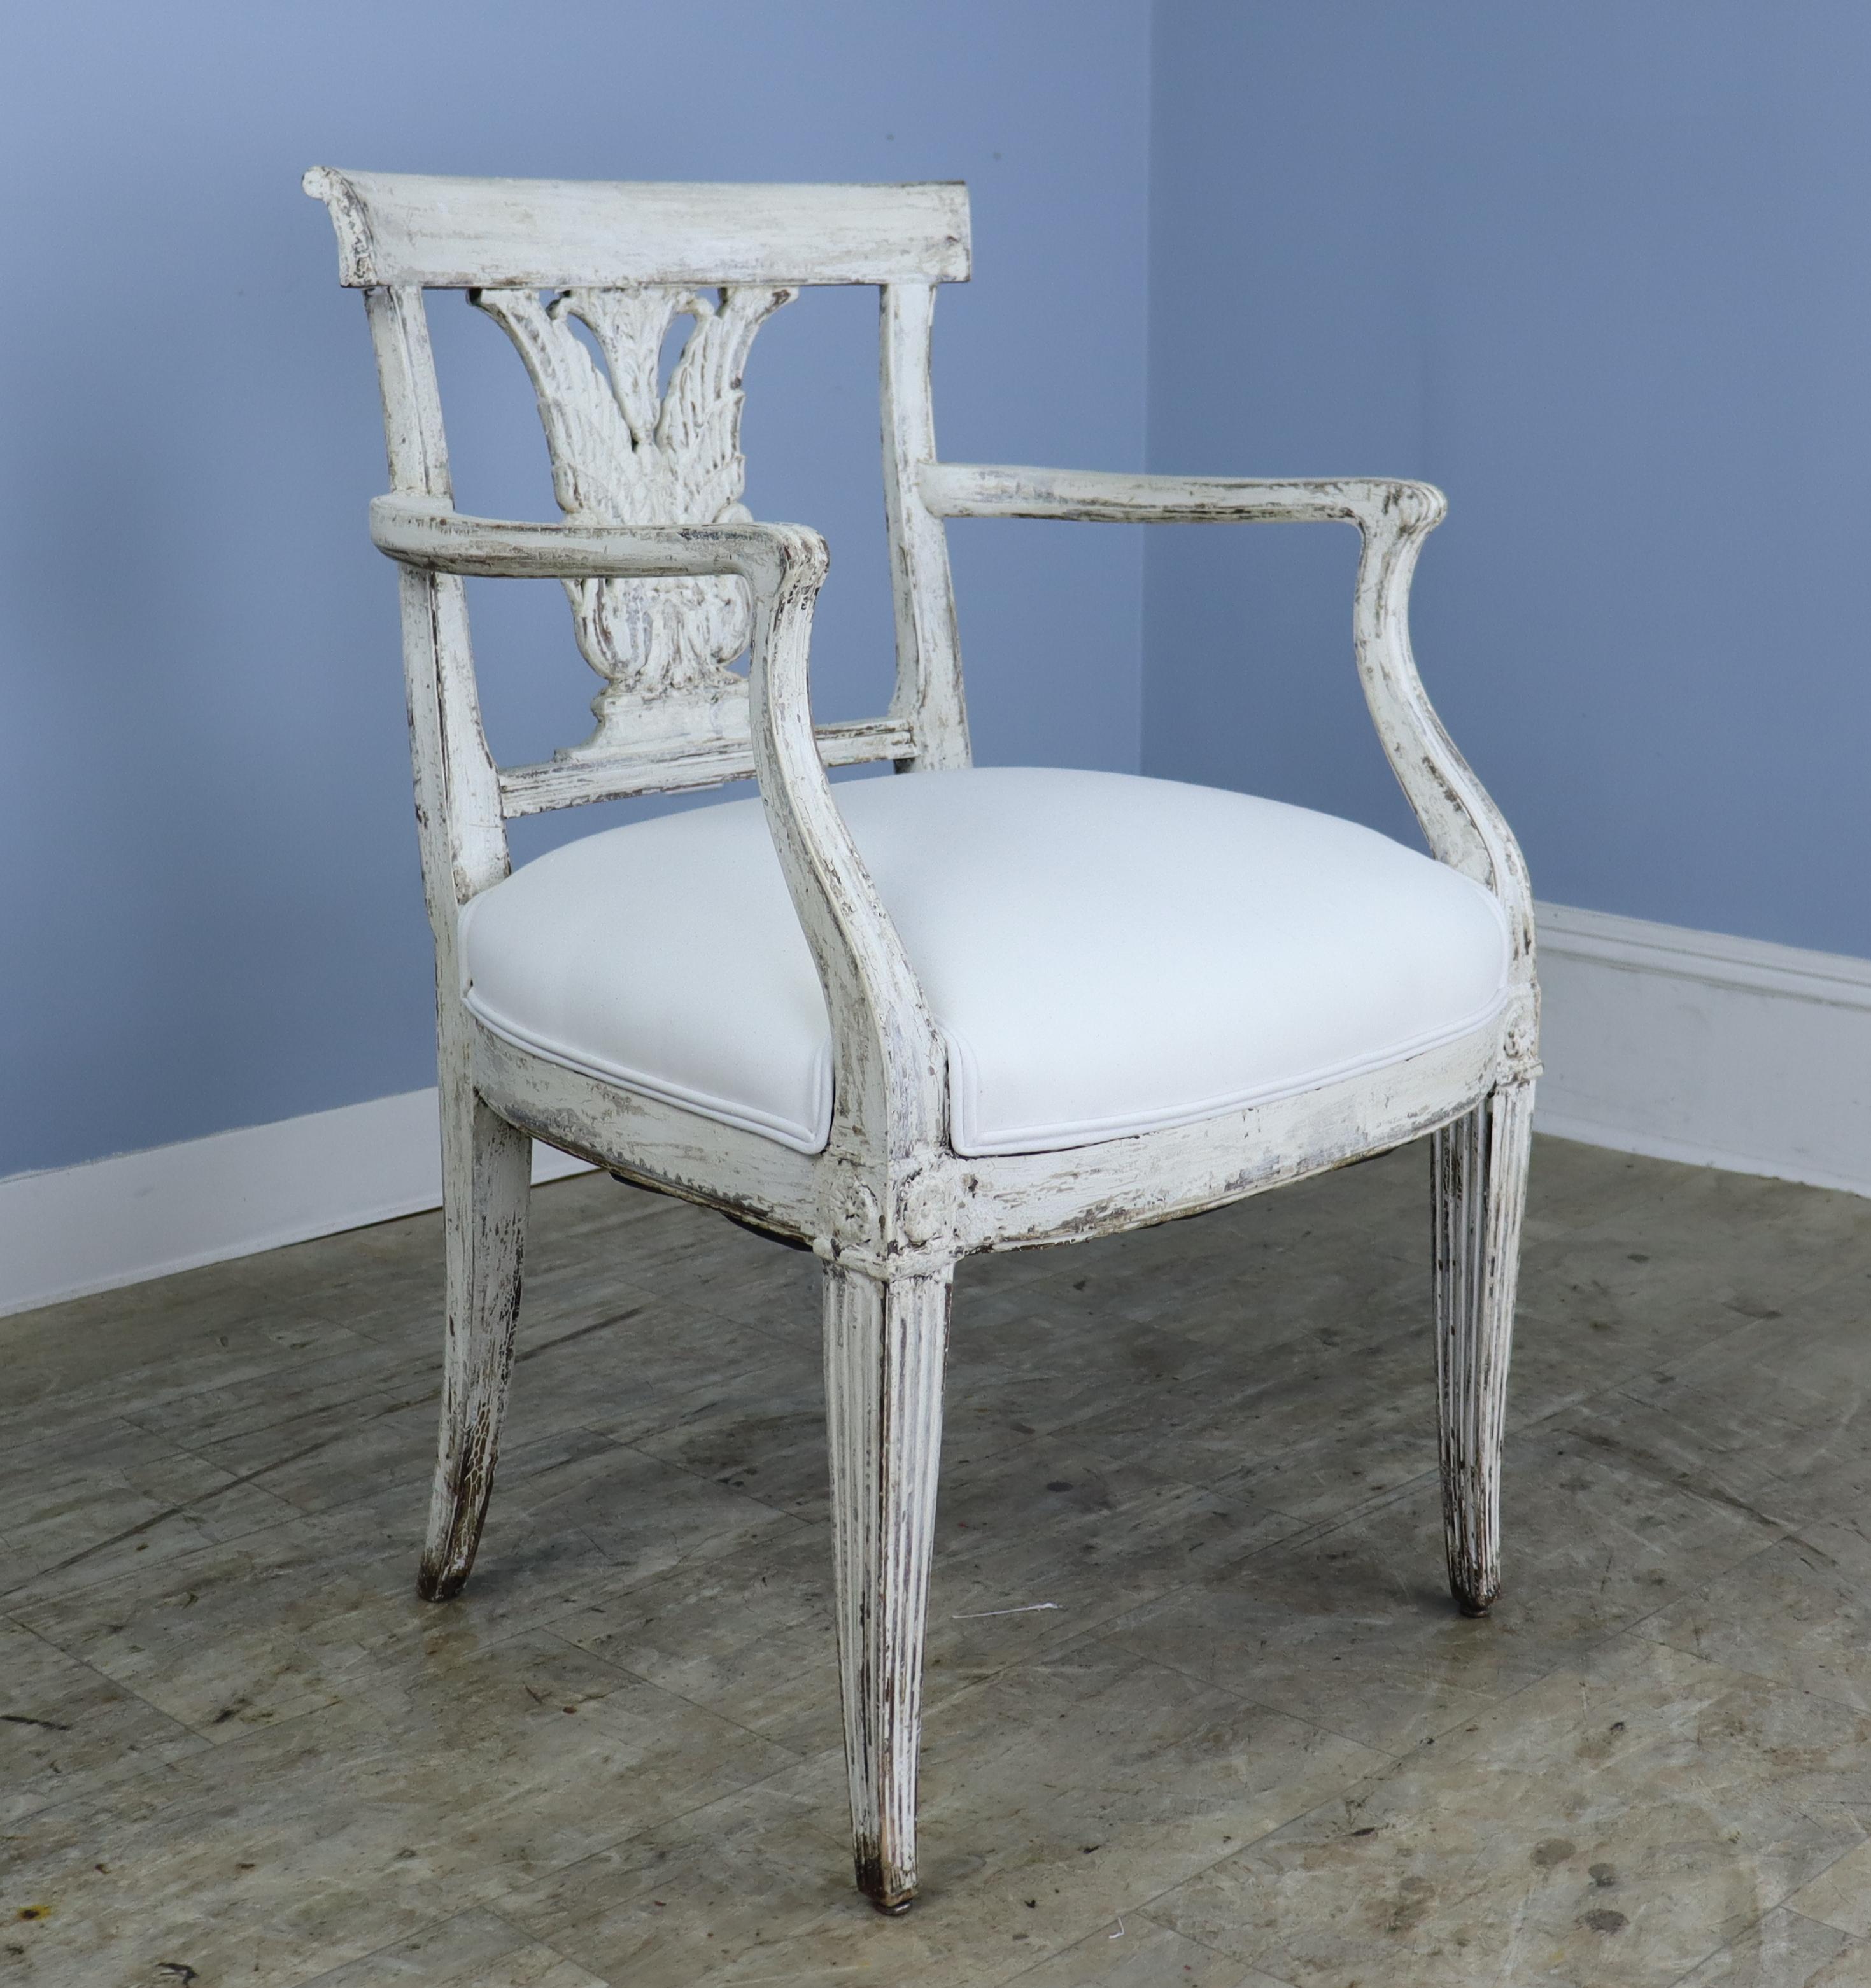 A set of 8 French Empire period wooden chairs, 2 armchairs and 6 side chairs. Note the graceful swan motif on the chairbacks, and the charming flower detail at the joints. We believe these to be recently painted and faux distressed. The seats have